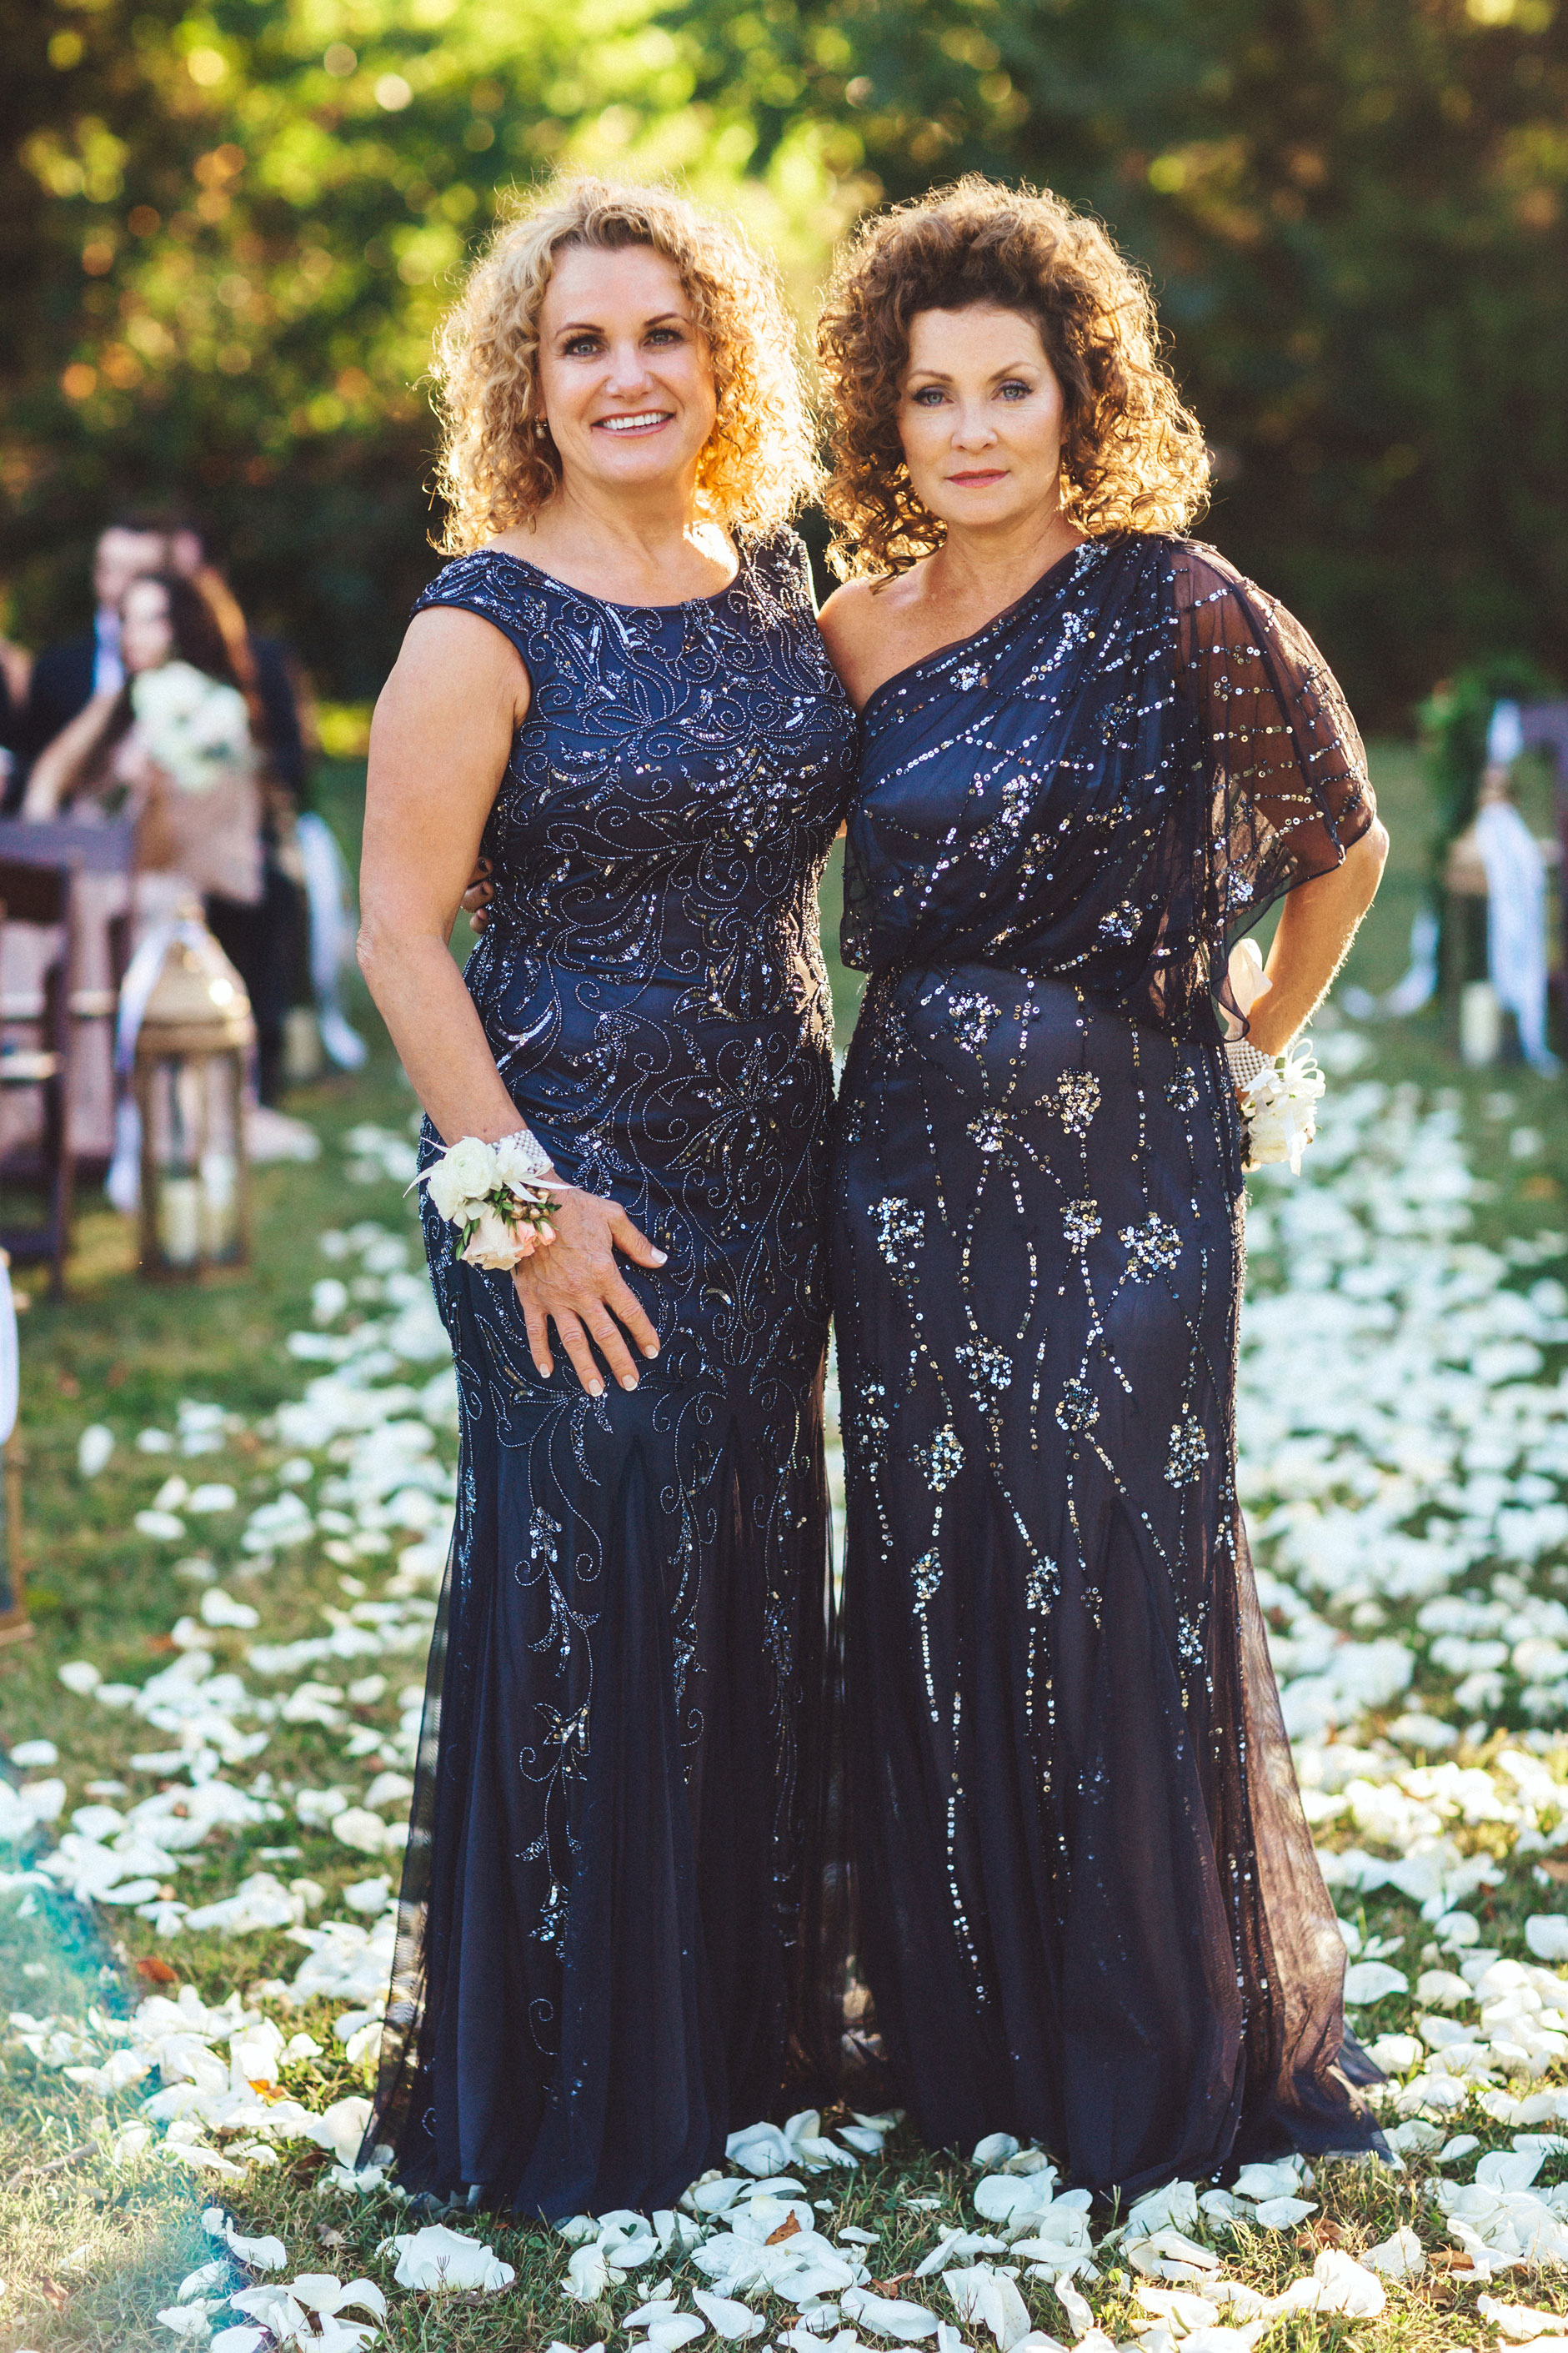 Me & Mr. Jones Wedding, Mother of The Bride, Mother of the Groom, Adrianna Papell Beaded Gown, Matching Mothers, Black Tie Wedding, Adrianna Papell One Shoulder Gown